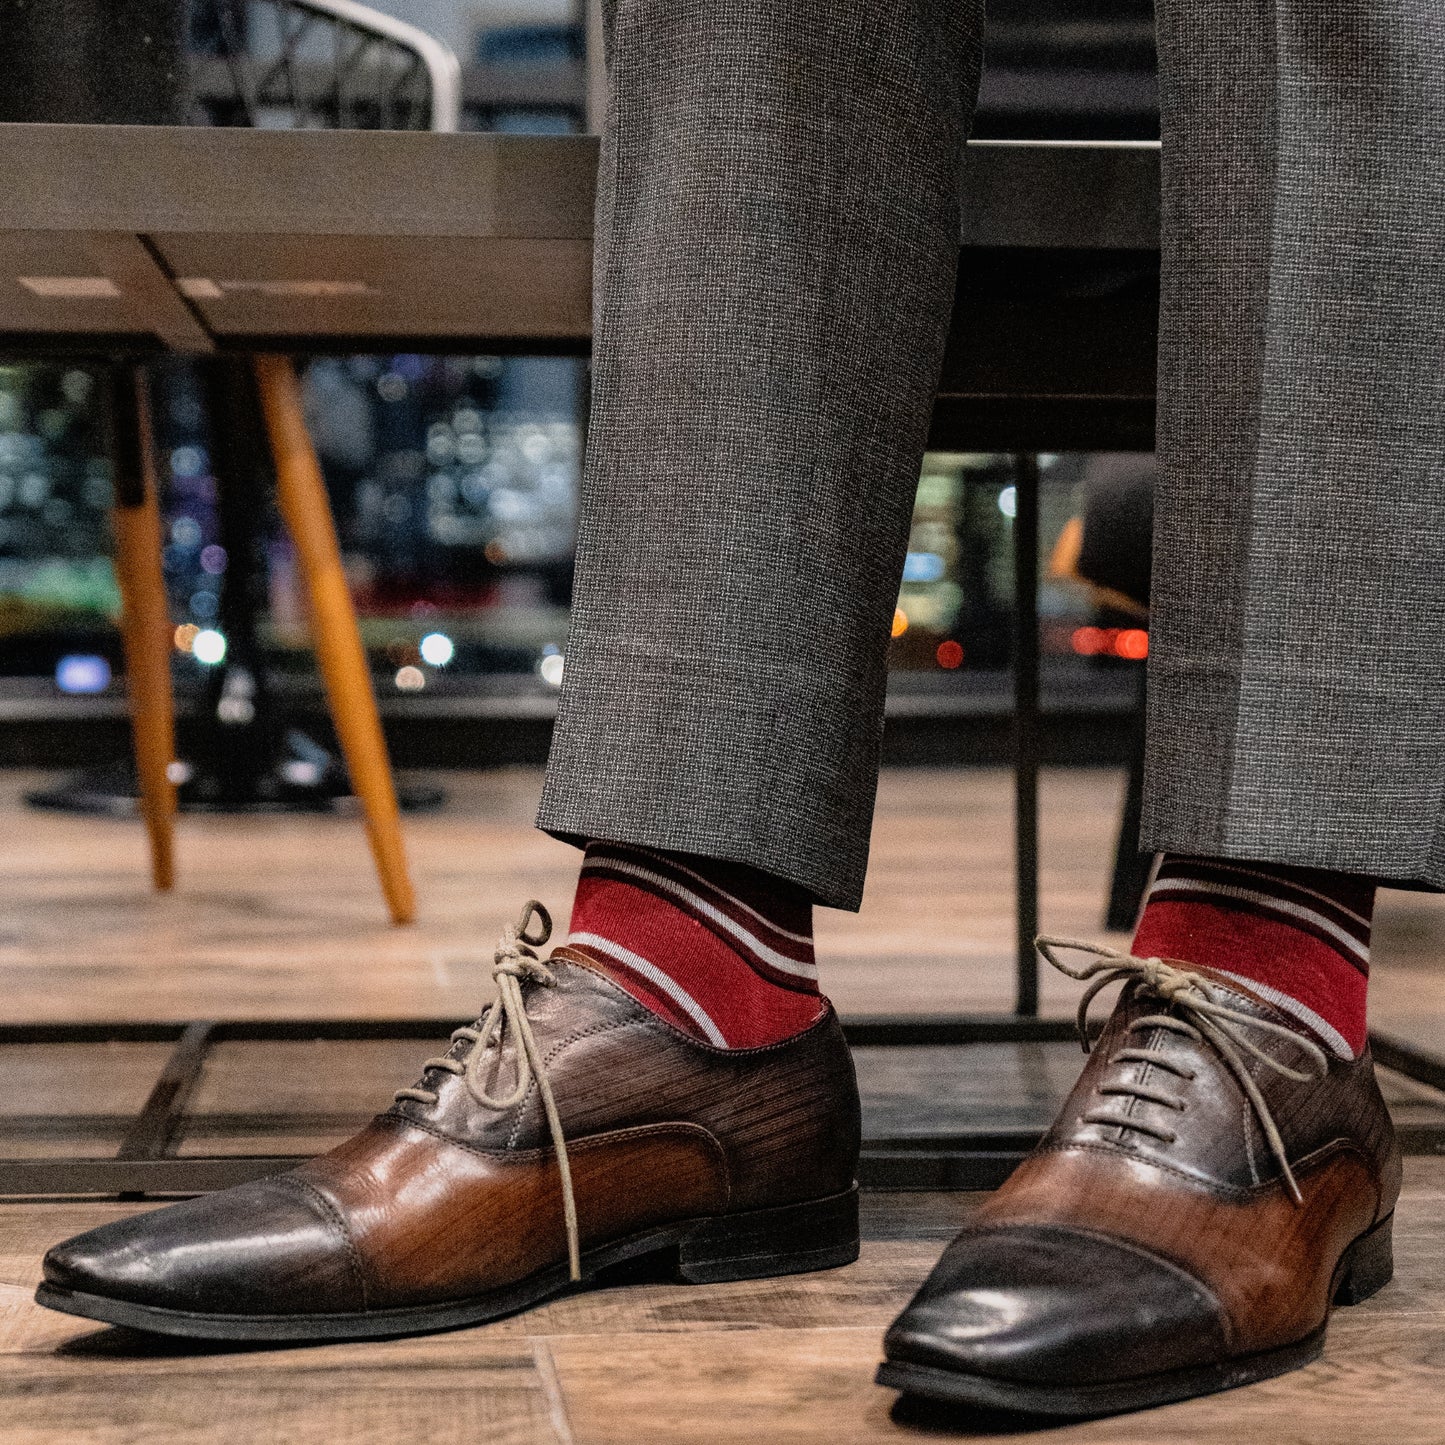 a men's dress sock with varying hues of red, with white and black contrasting stripes